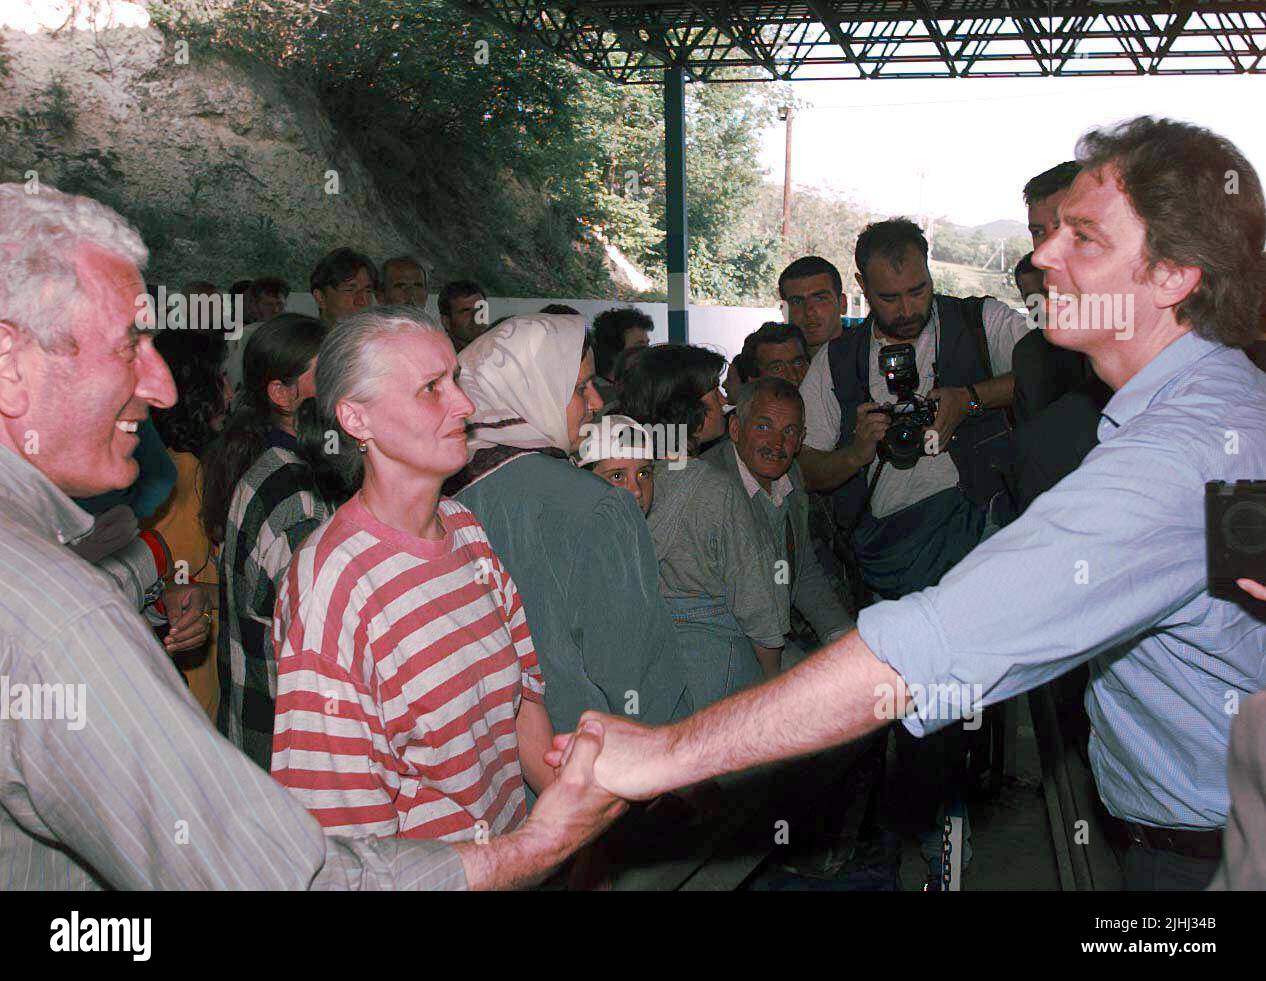 File photo dated 03/05/99 of the then Prime Minister Tony Blair meeting Kosovan refugees at the border crossing point between Kosovo and Macedonia, near Skopje. New Labour's attempts to tackle immigration were partly thwarted by a UN protocol which meant the UK was fundamentally deemed an 'attractive destination' for asylum seekers, internal memos suggest. Home Office permanent secretary Sir David Omand said the 1951 Refugee Convention - which says refugees should not be sent back to a country where they face serious threats to their safety - and the 'generous reception' given to people from t Stock Photo